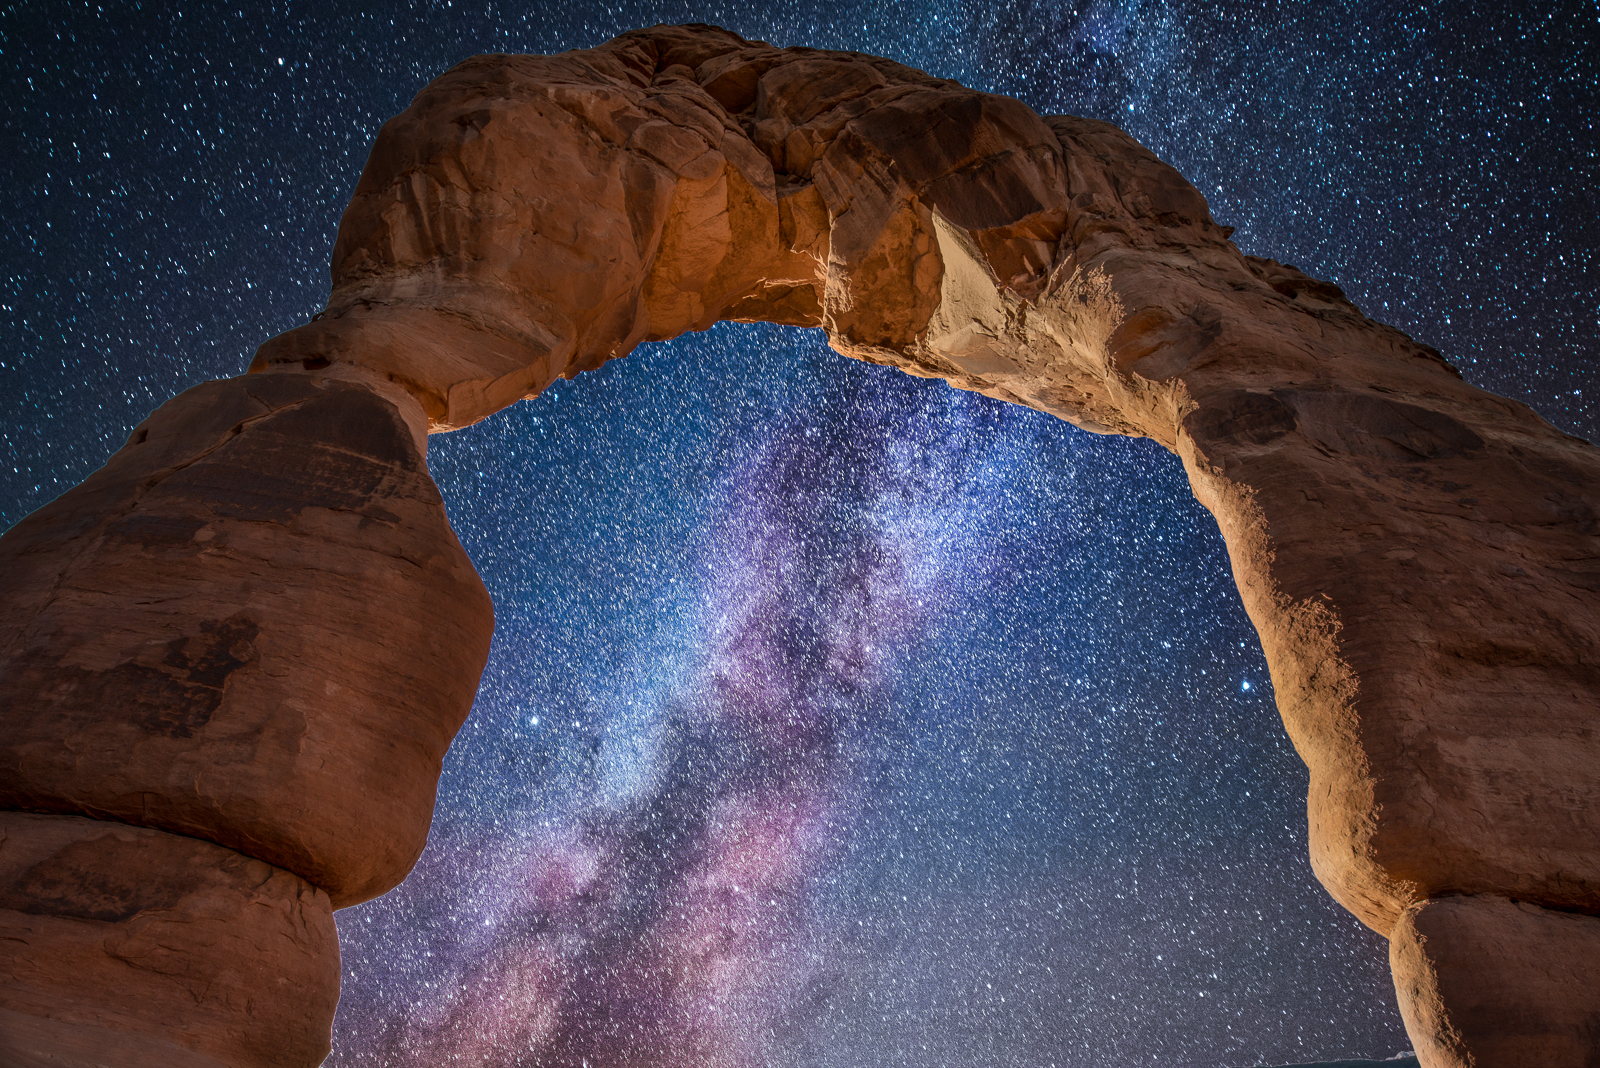 Arches National Park, Delicate Arch and Milky Way